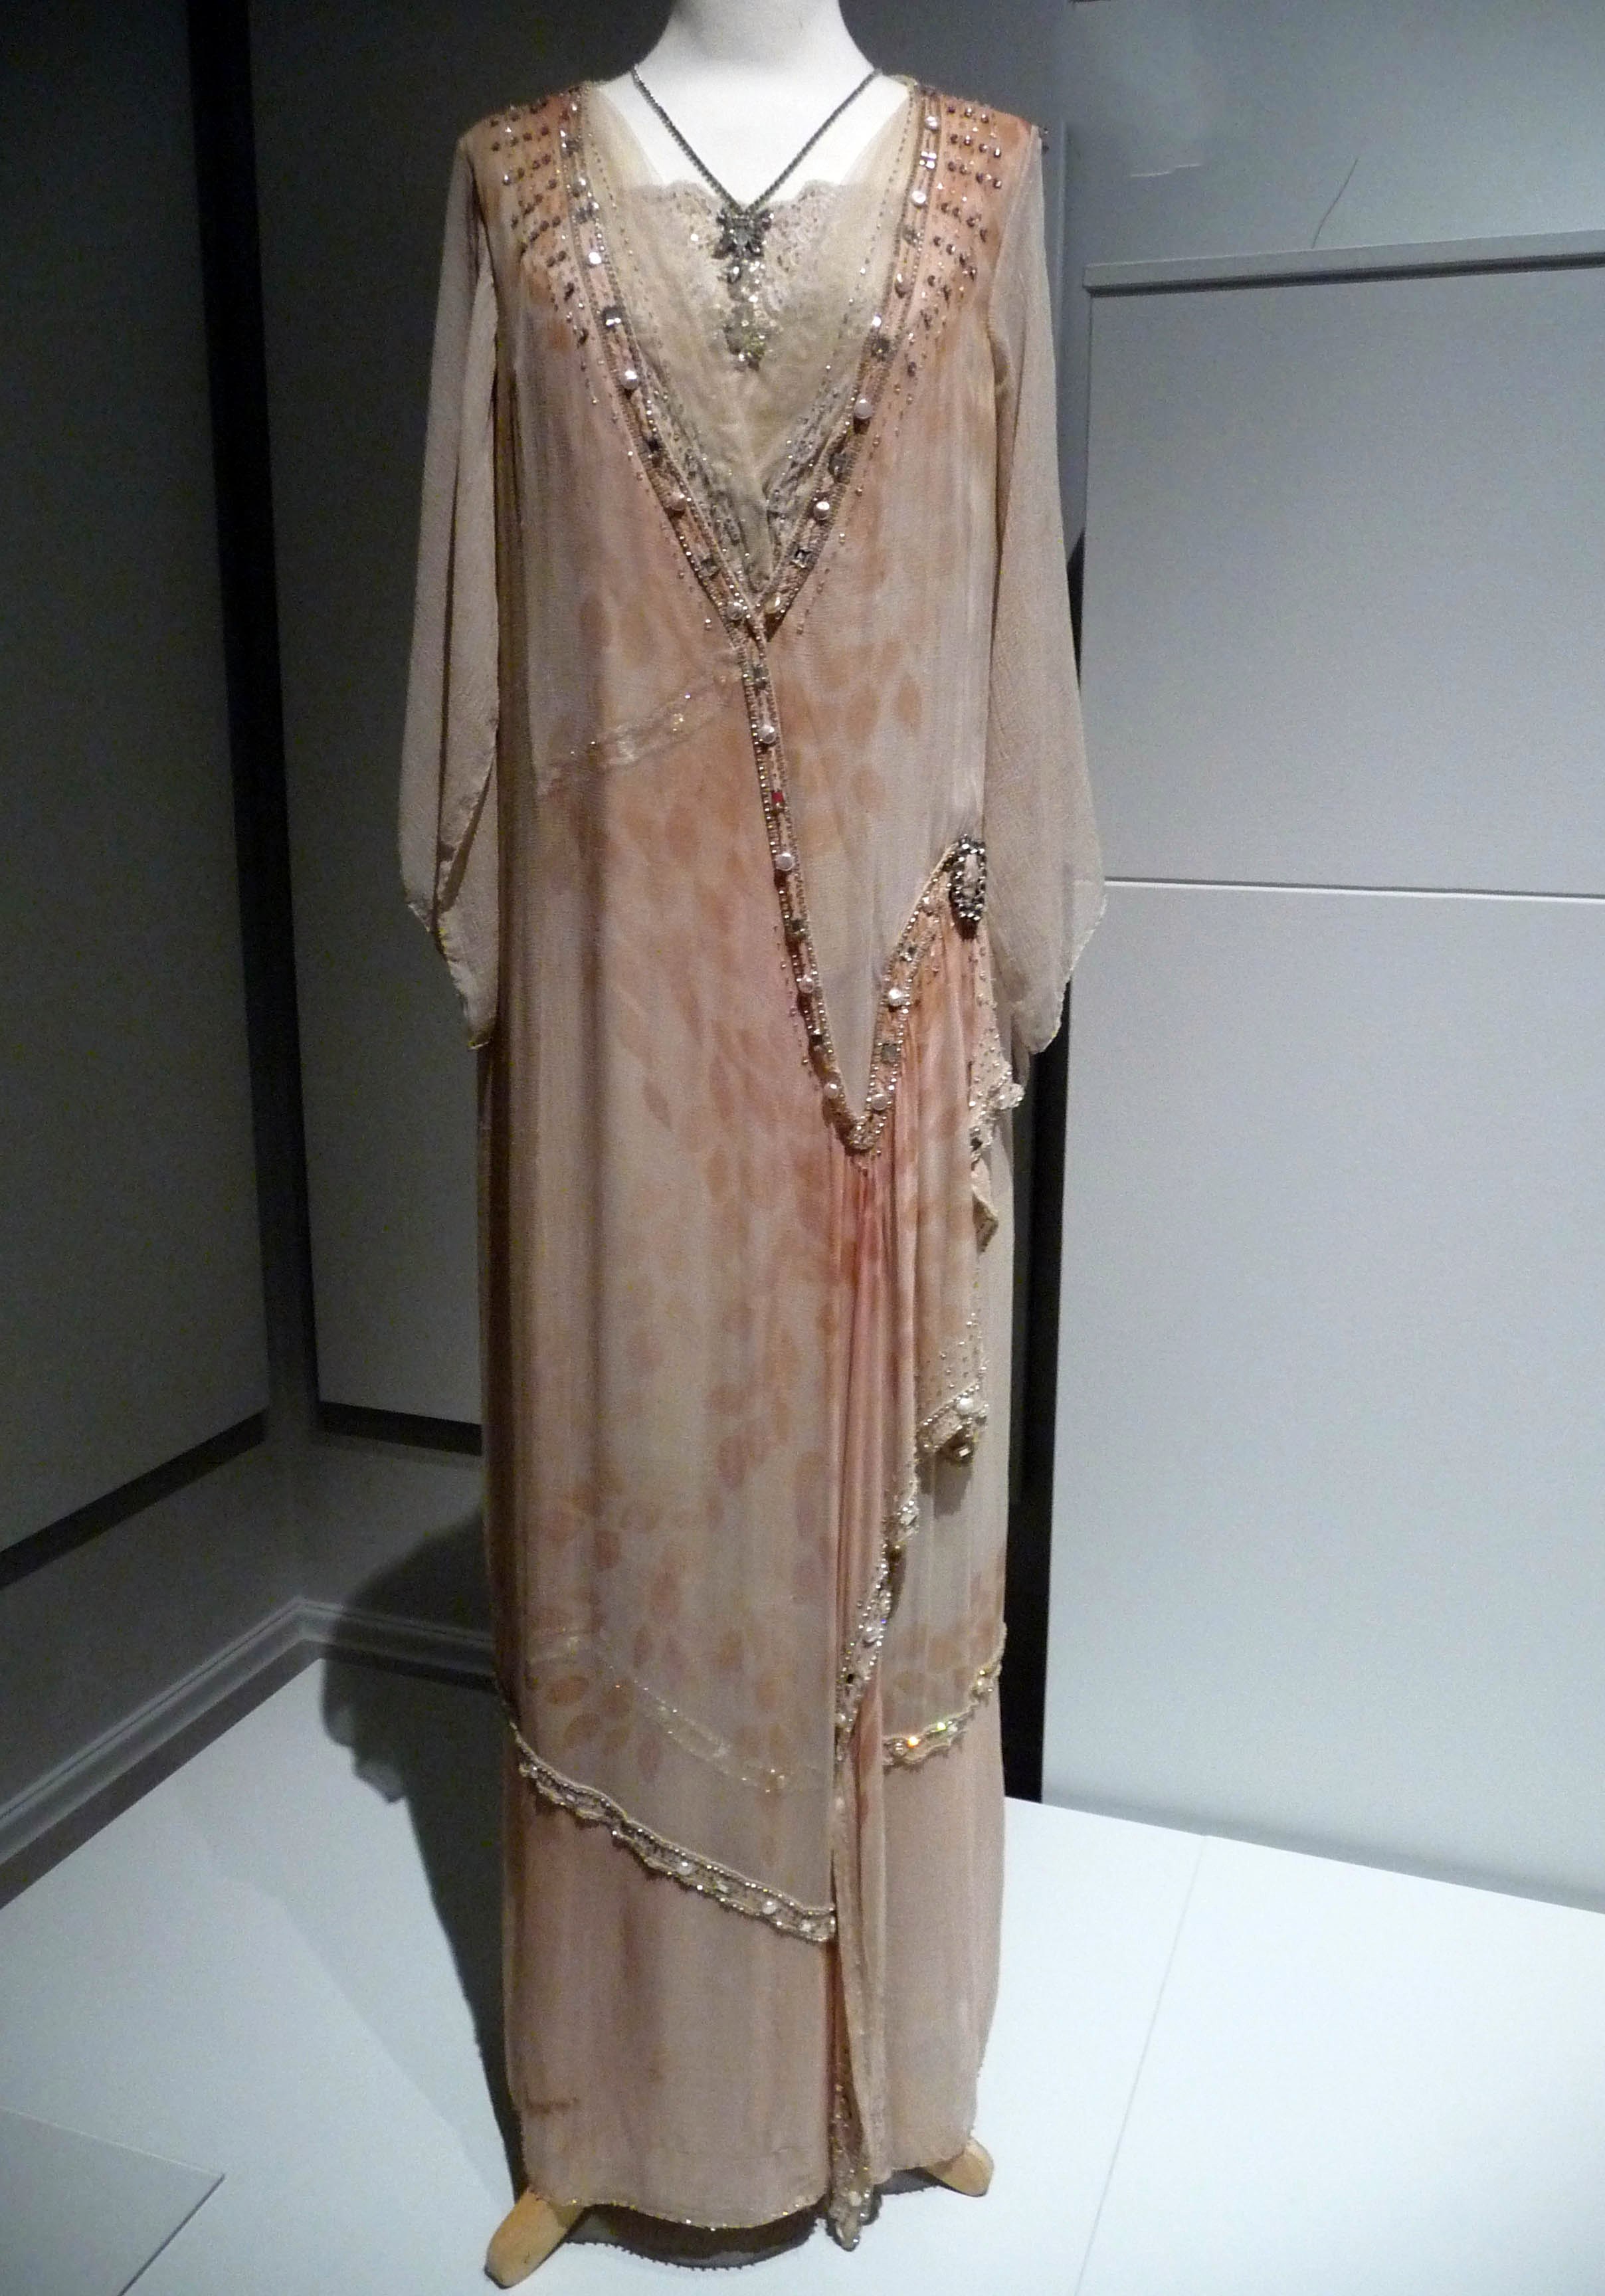 TUNIC-STYLE EVENING DRESS, printed crepe with diamante, pearl and mirrored glass beading, made by Cosprop, 2012. Worn by Elizabeth McGovern as Cora Crawley, th Countess of Grantham in Downton Abbey.